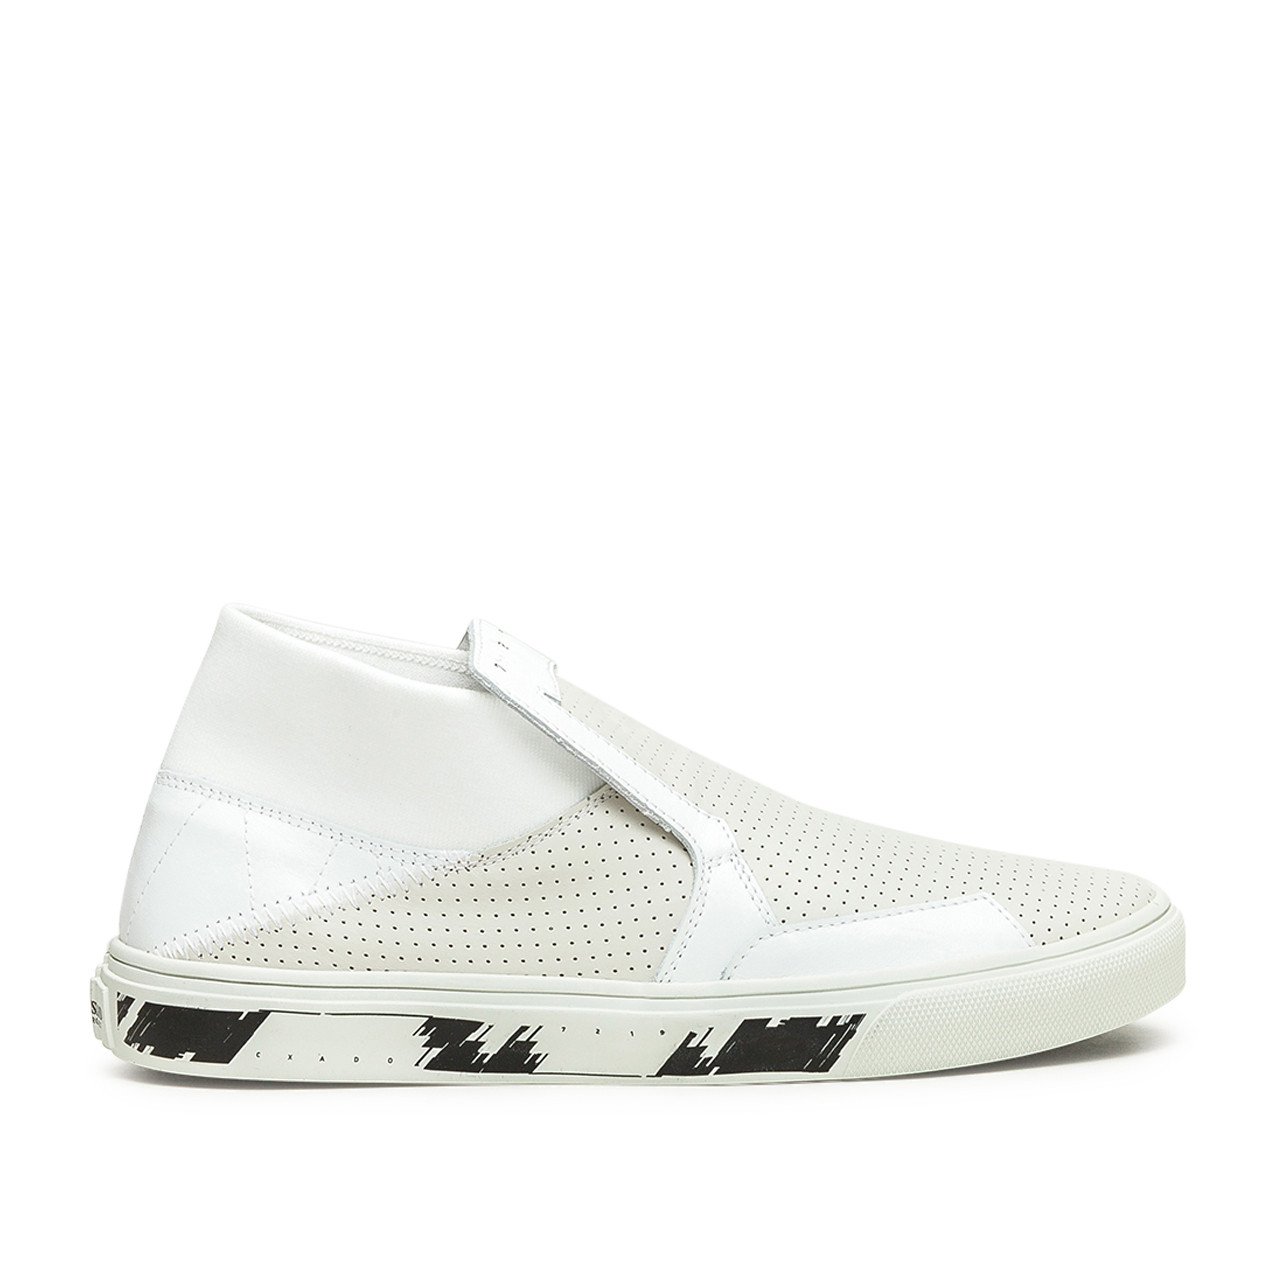 stone island shadow project slip-on mid leather (white) - 7219s0123.v0097 - a.plus - Image - 1